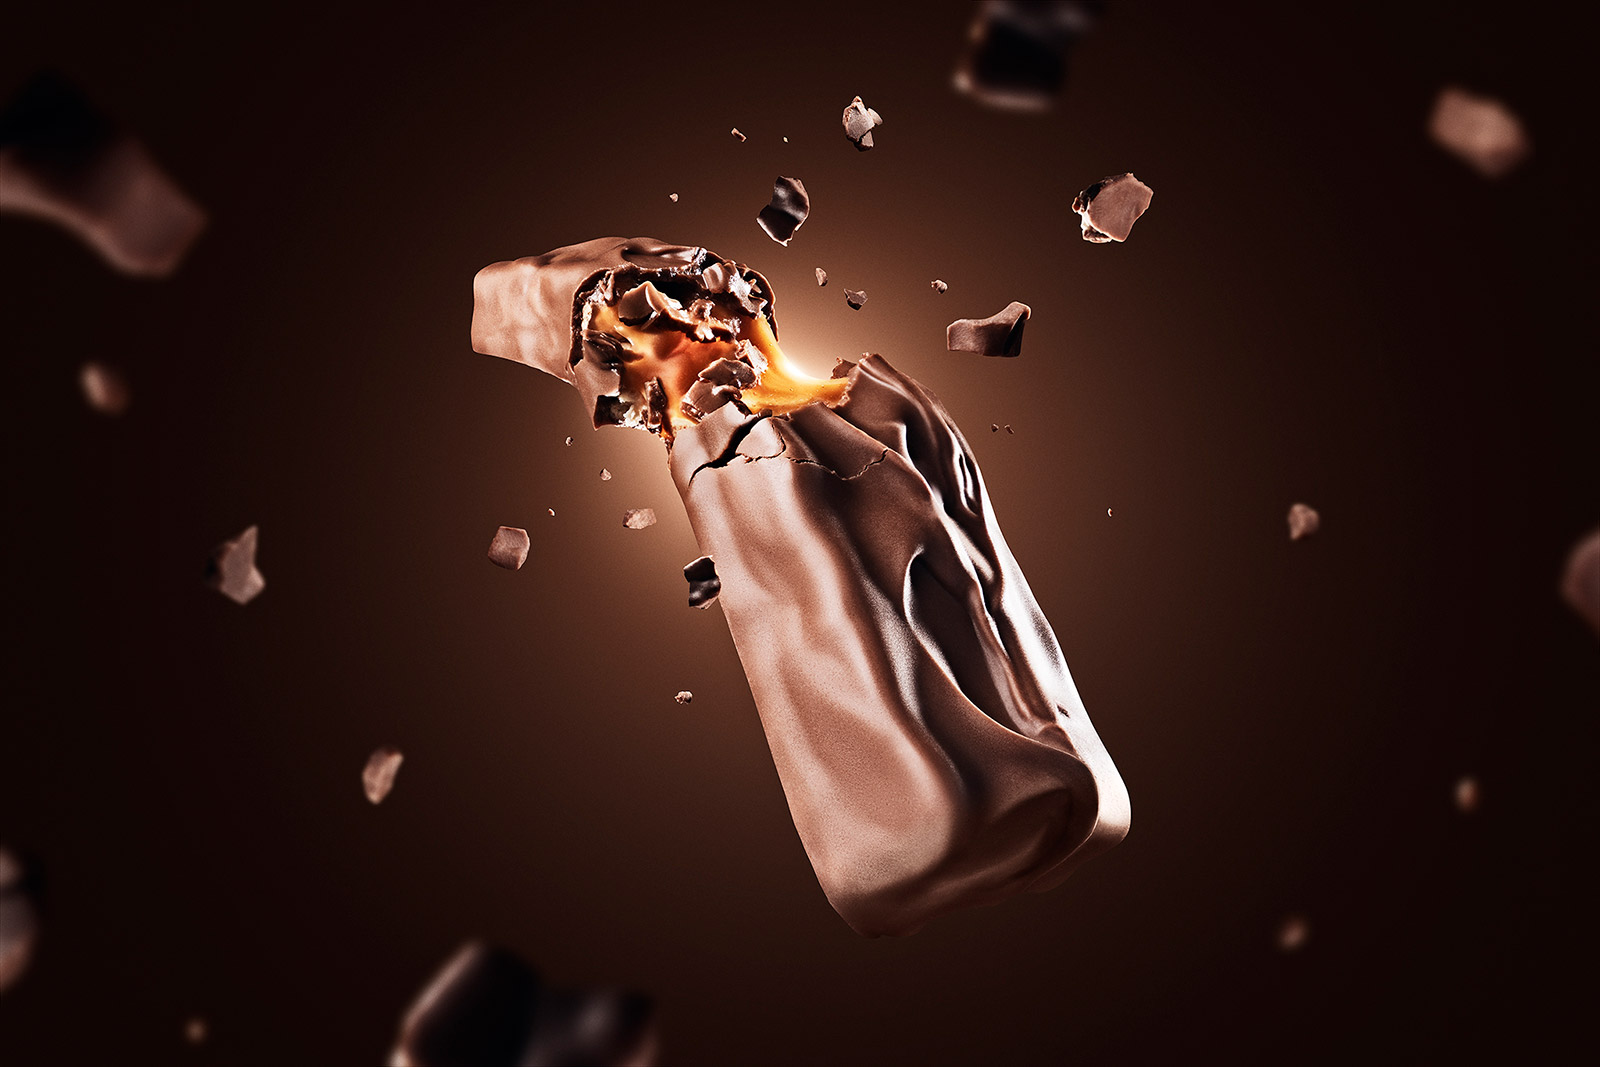 Hi-End photography retouching workshop: Snickers explosion